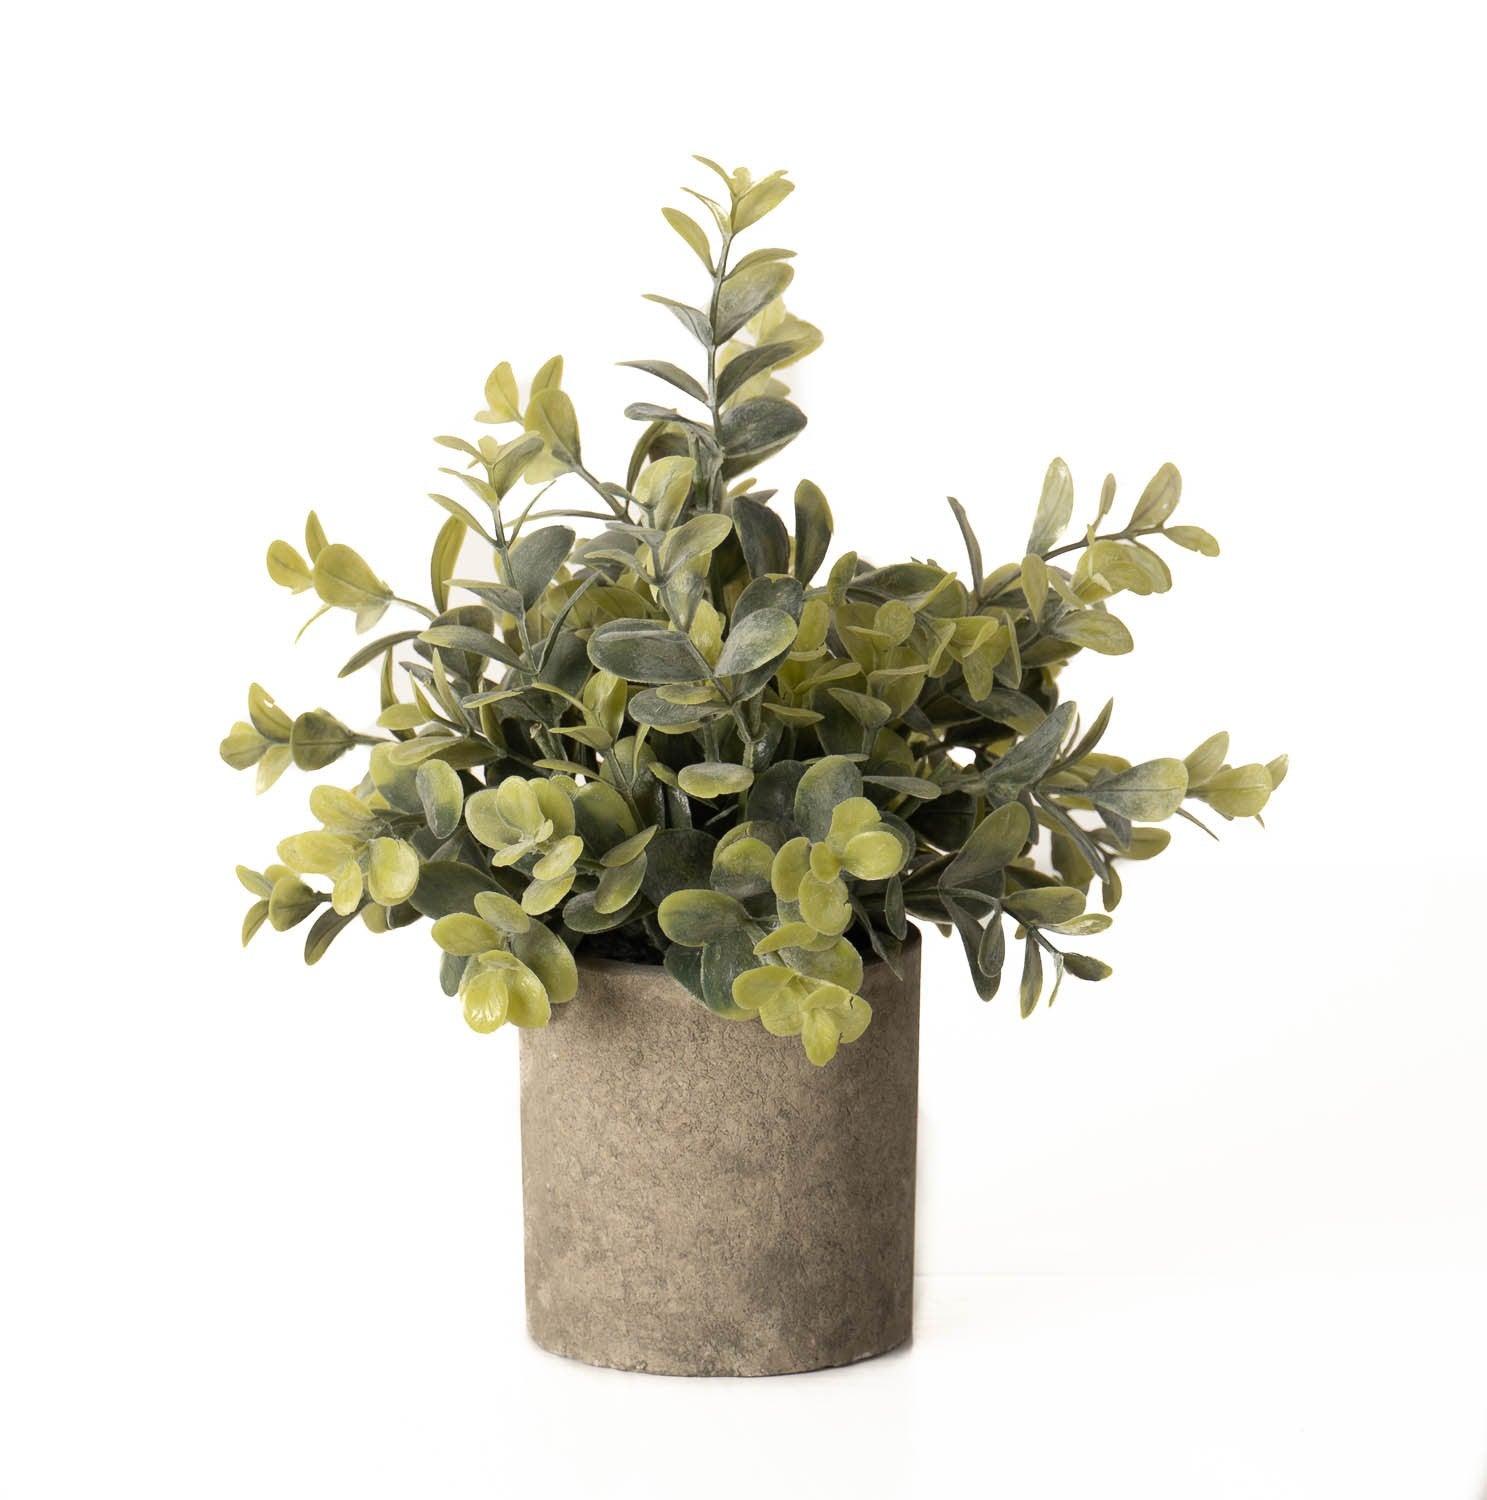 Eucalyptus Plant In Stone Effect Pot - £22.95 - Gifts & Accessories > All Artificial Potted Plants > Ornaments 